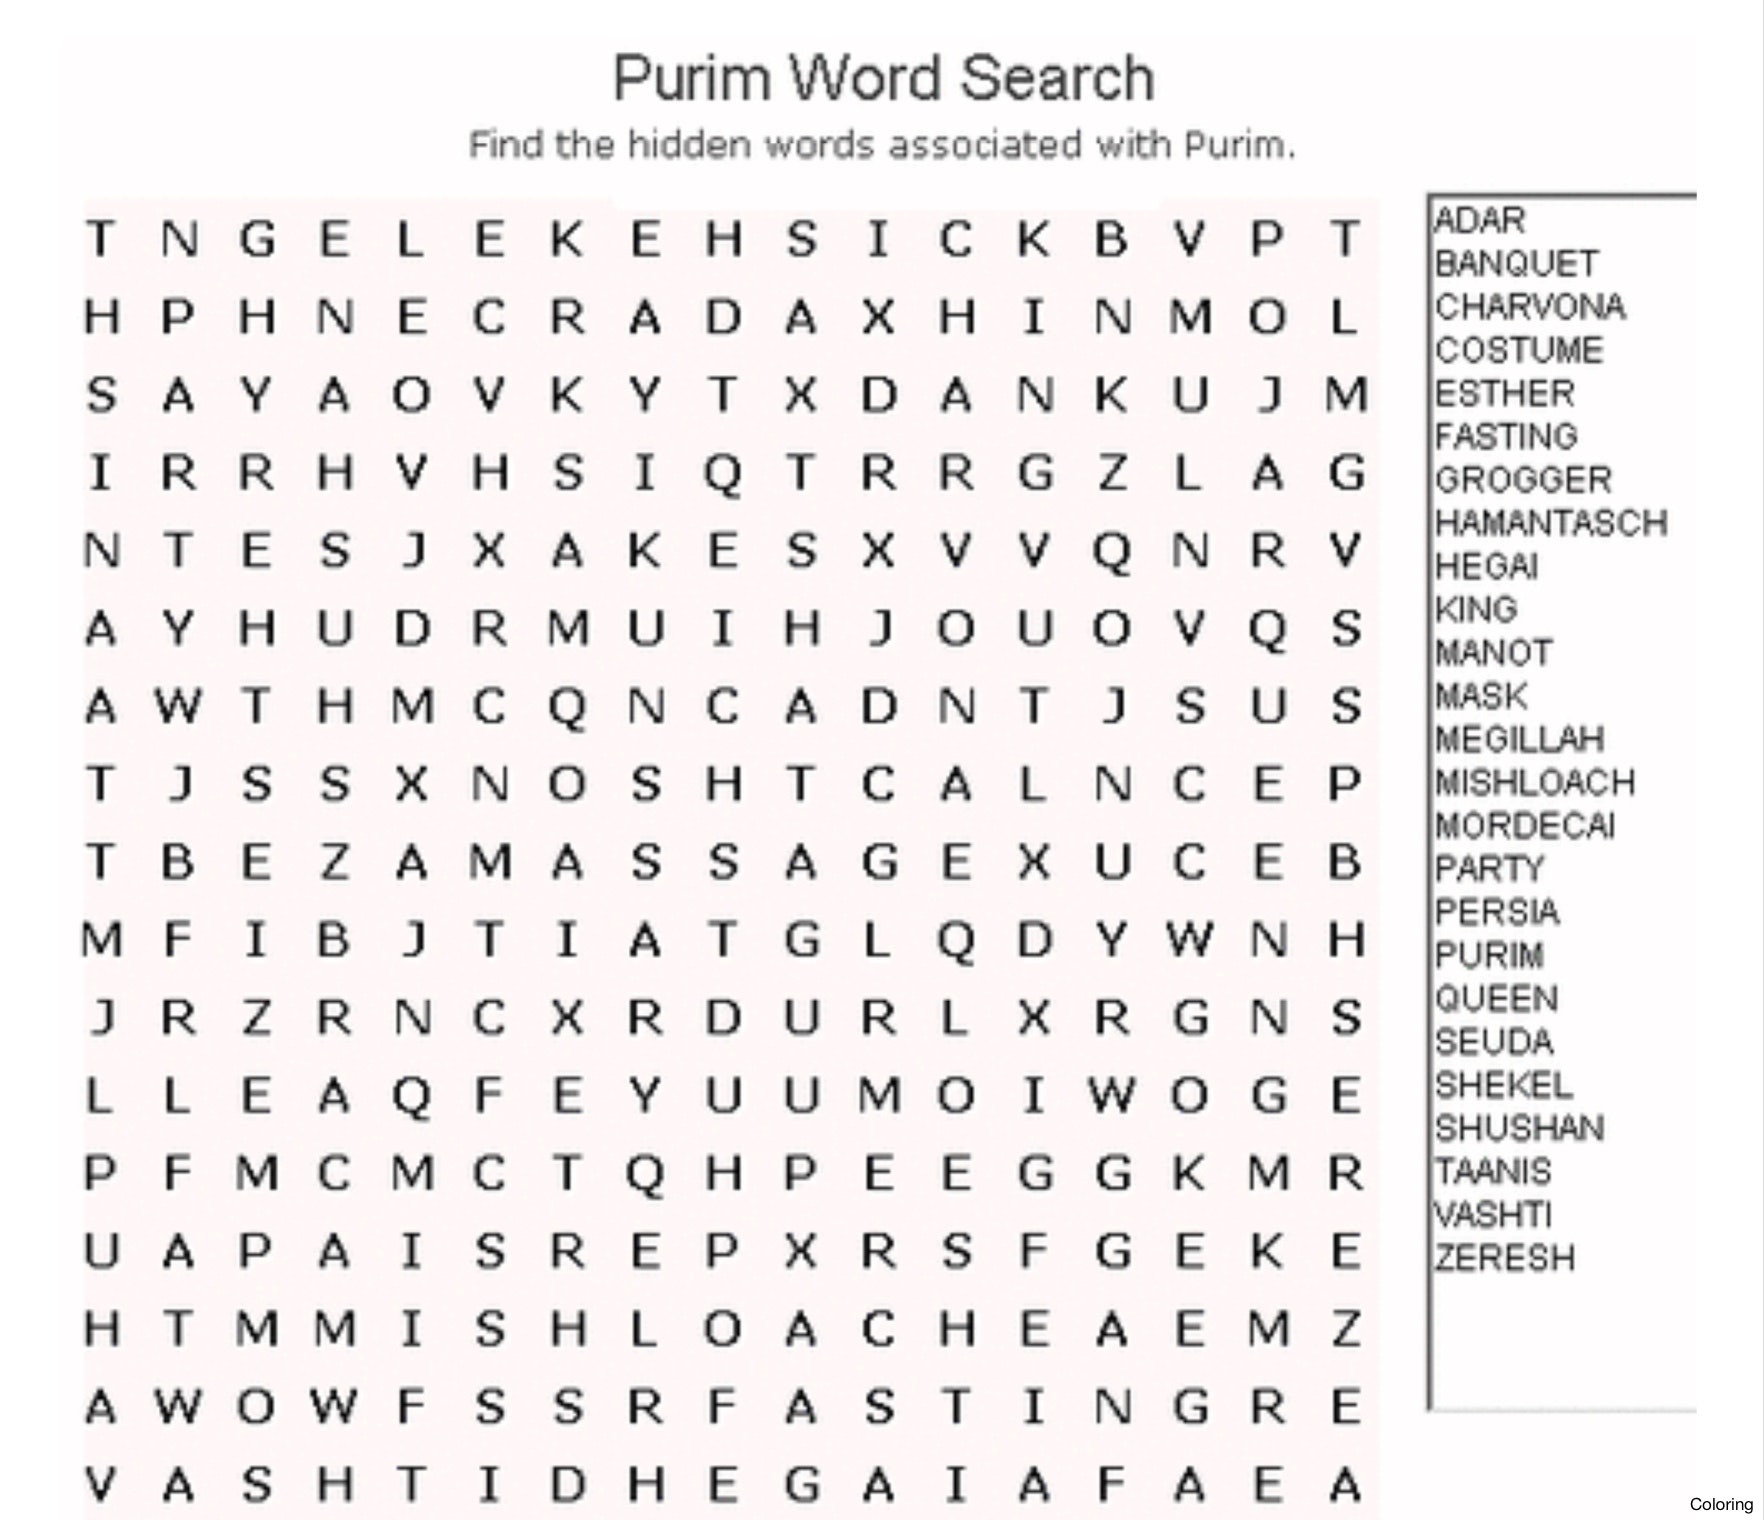 Word Coloring Page Generator Word Coloring Page Generator New Gen Wordsearch2001 Puzzle Word